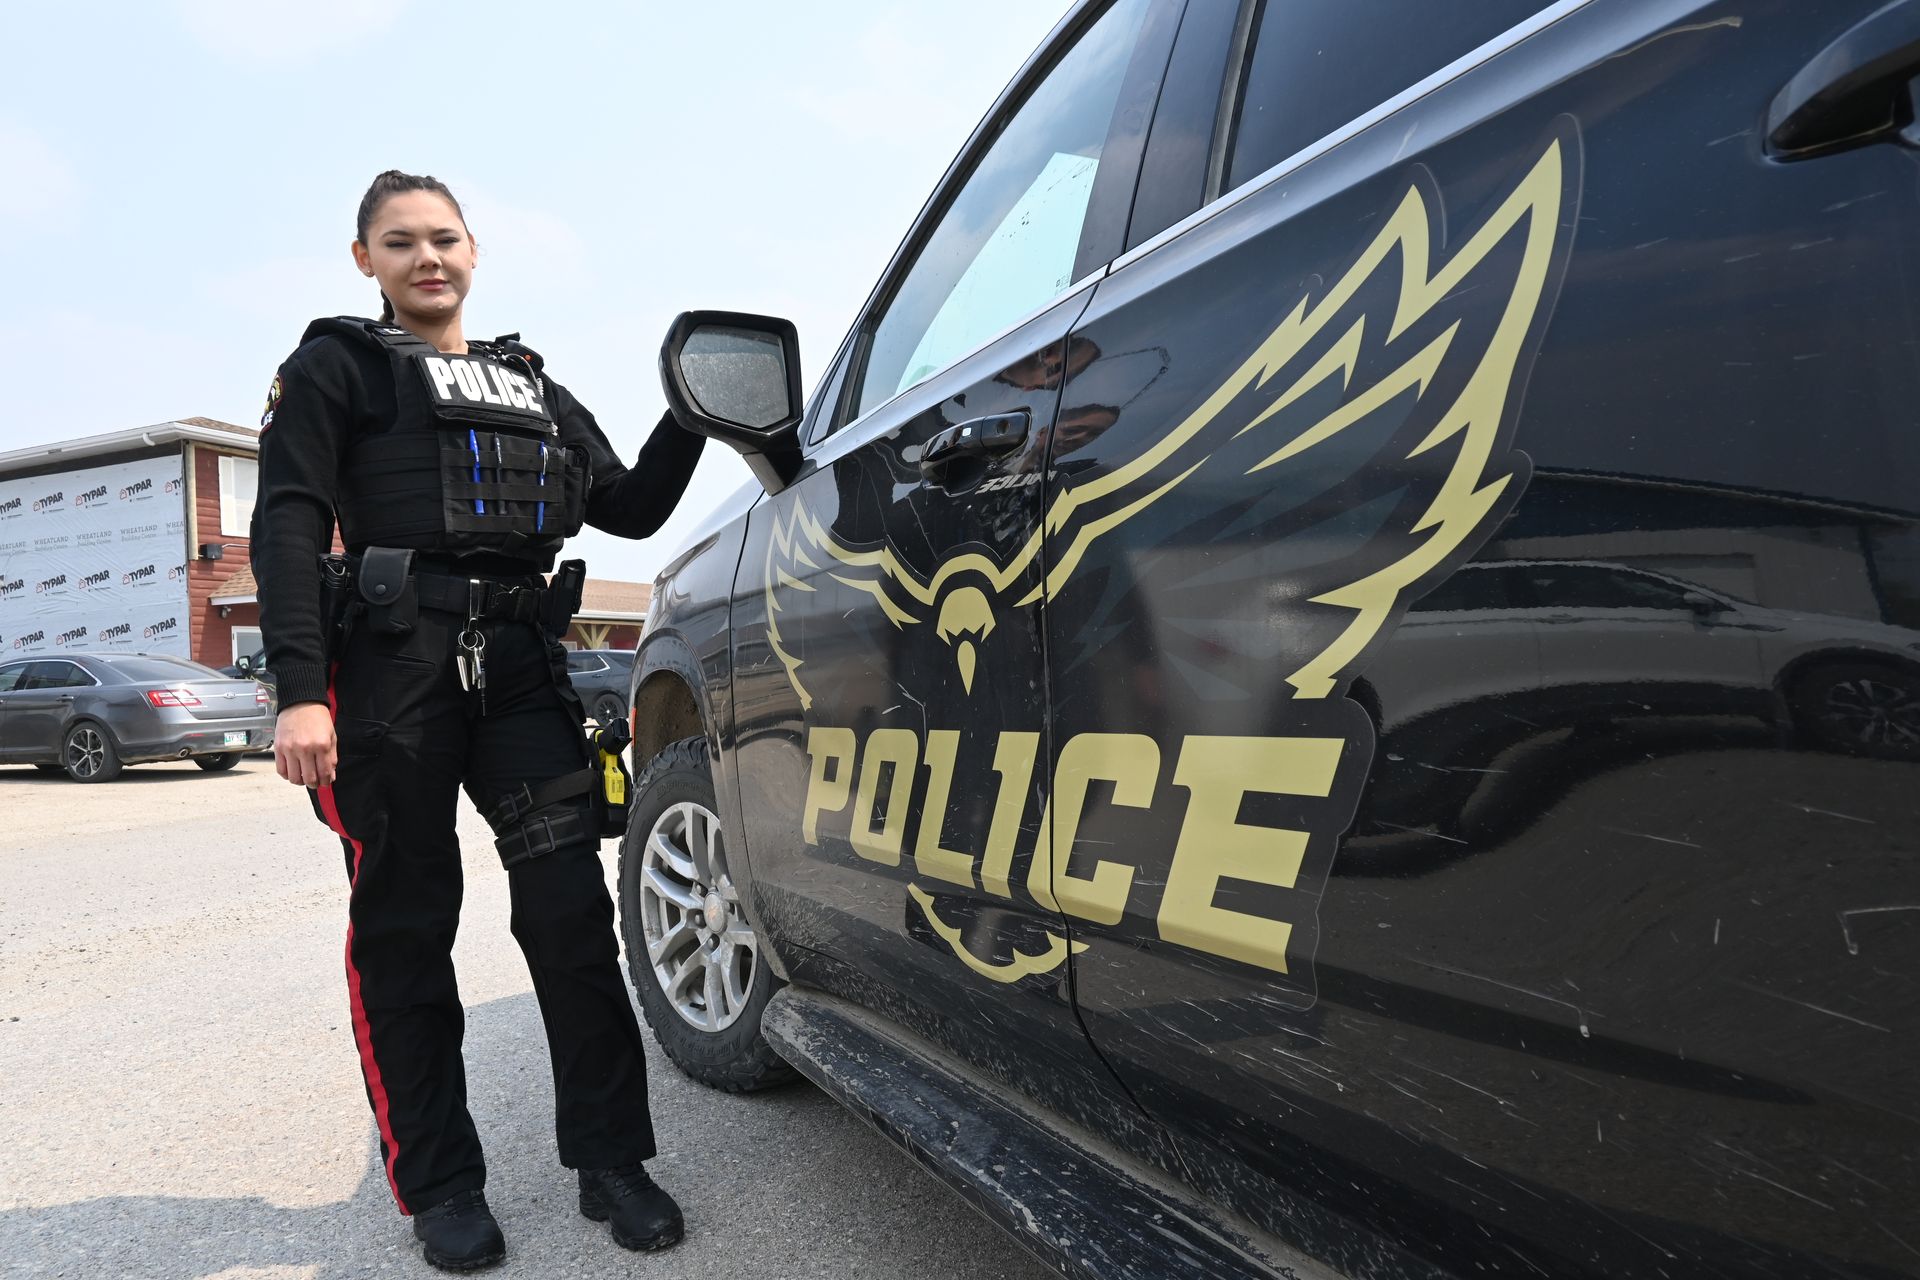 MFNPS-Manitoba First Nations Police Service - Crime Prevention officer standing with Vehicle